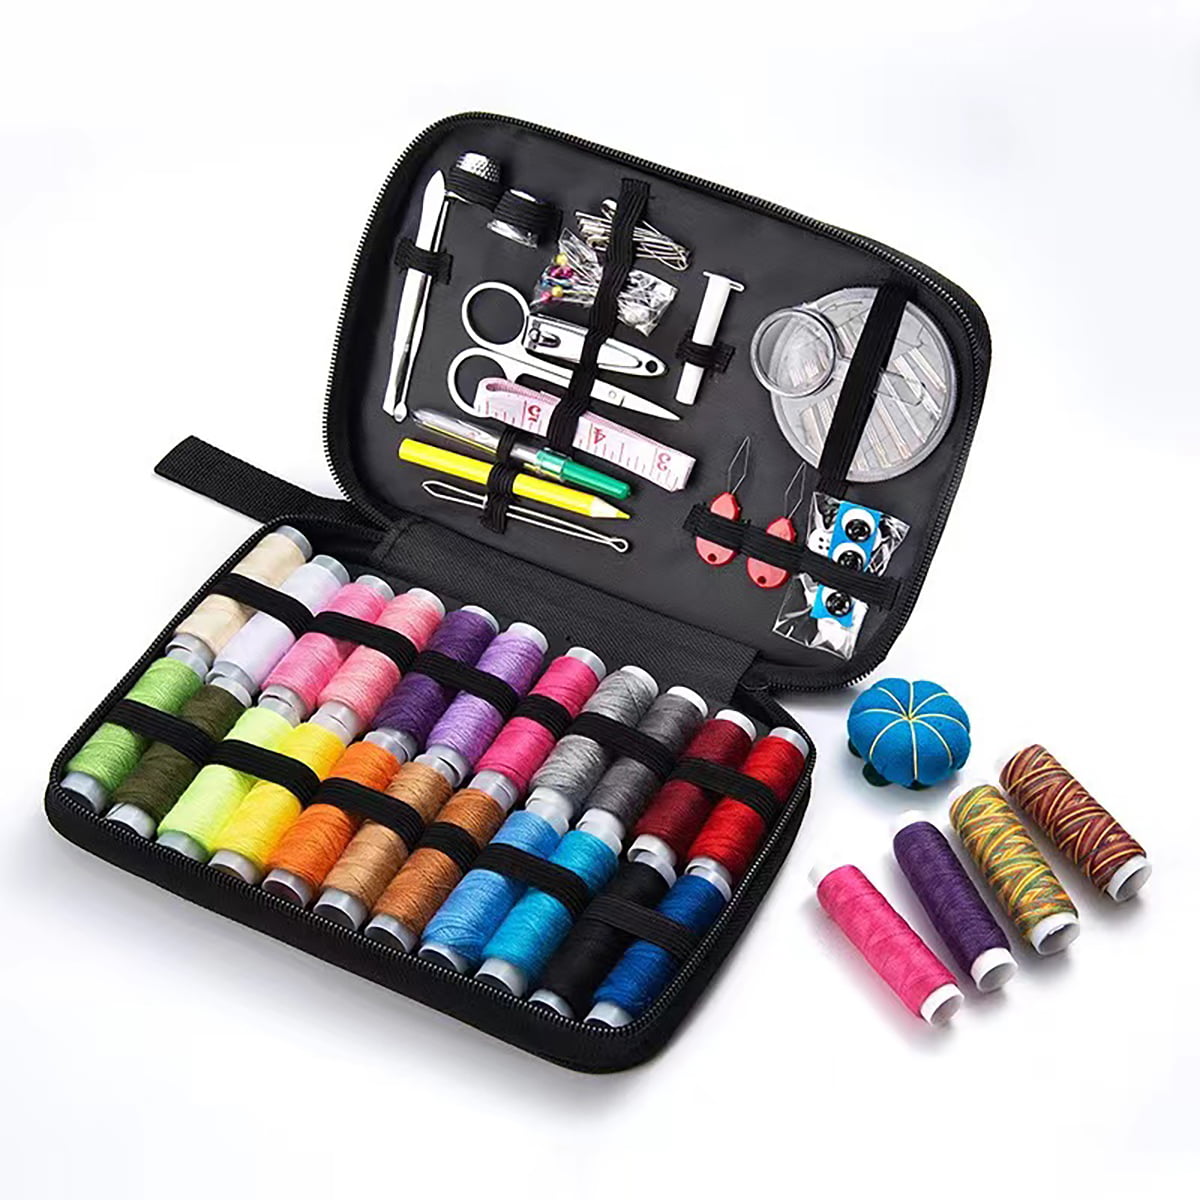 Sewing Kit for Adults and Kids - 100 Sewing Supplies and Accessories ...